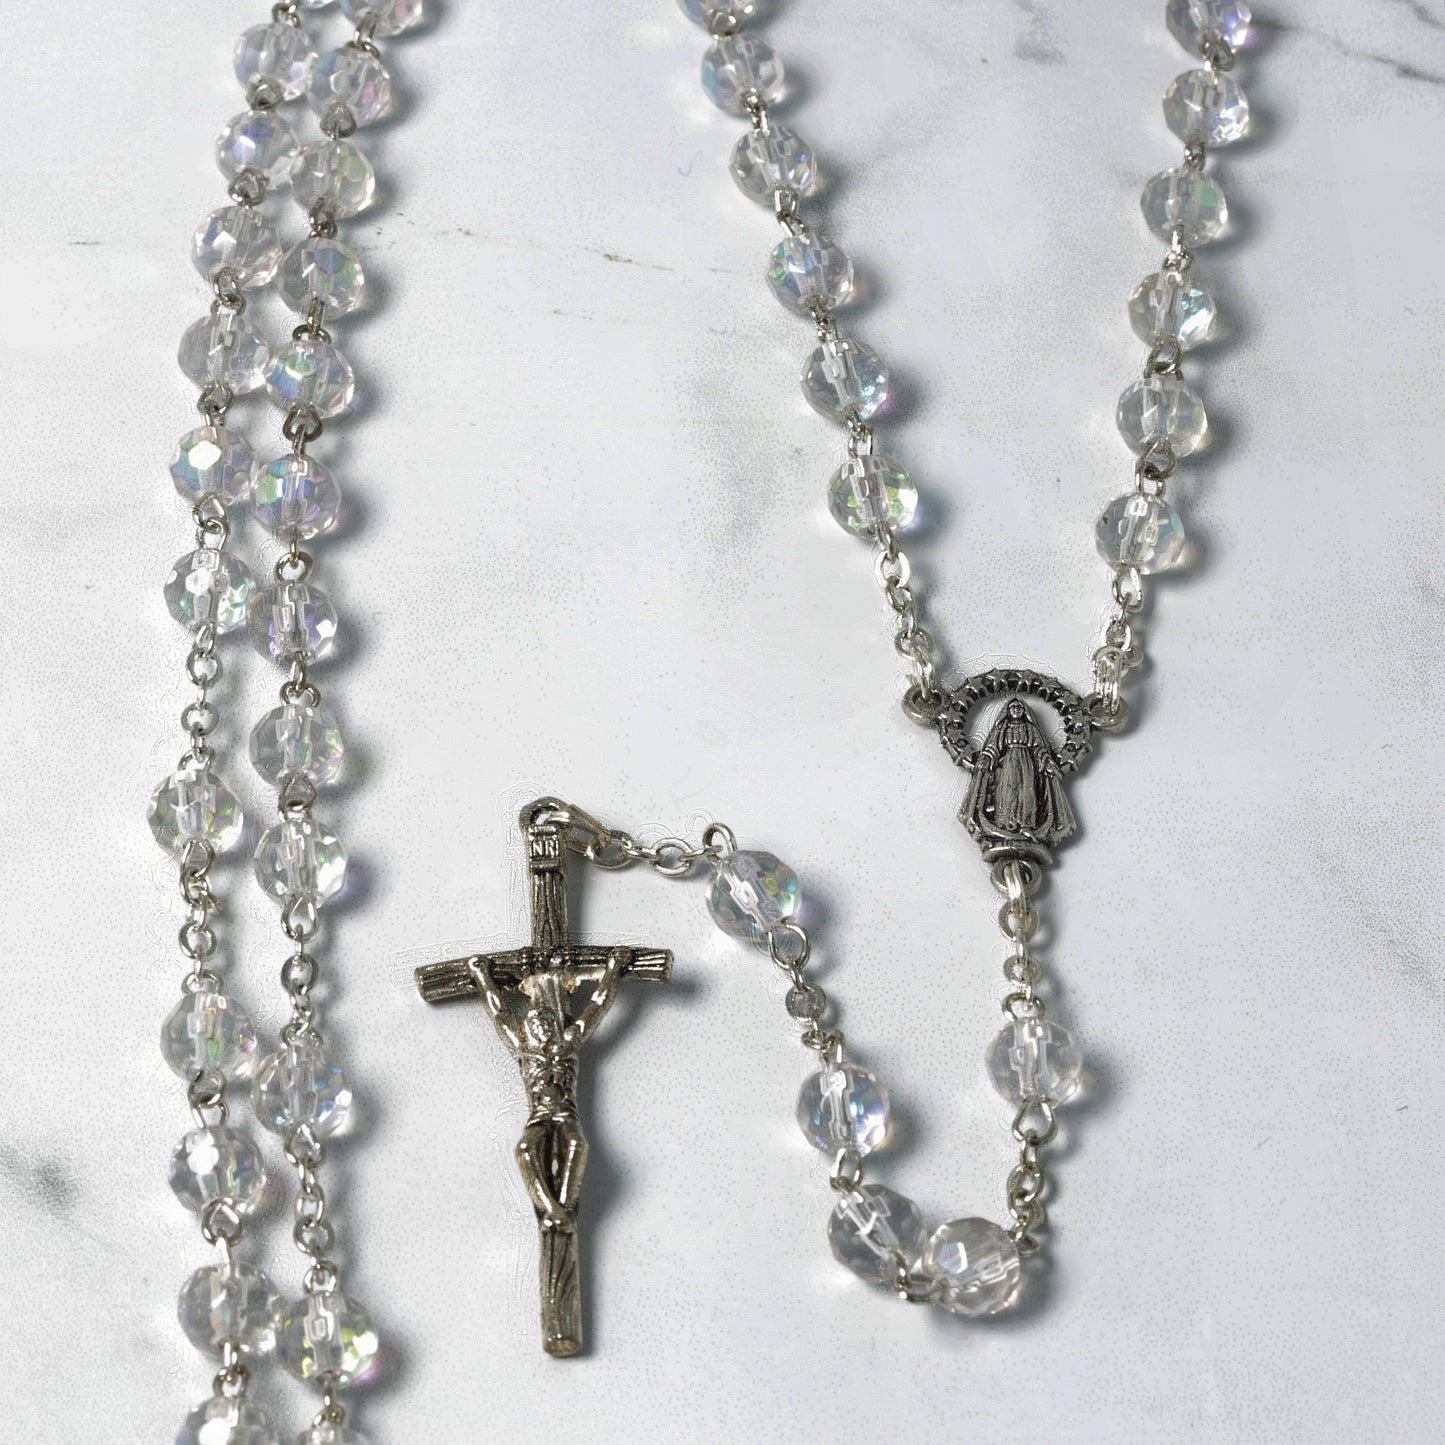 Crystal Rosary 6mm Souvenirs from Italy